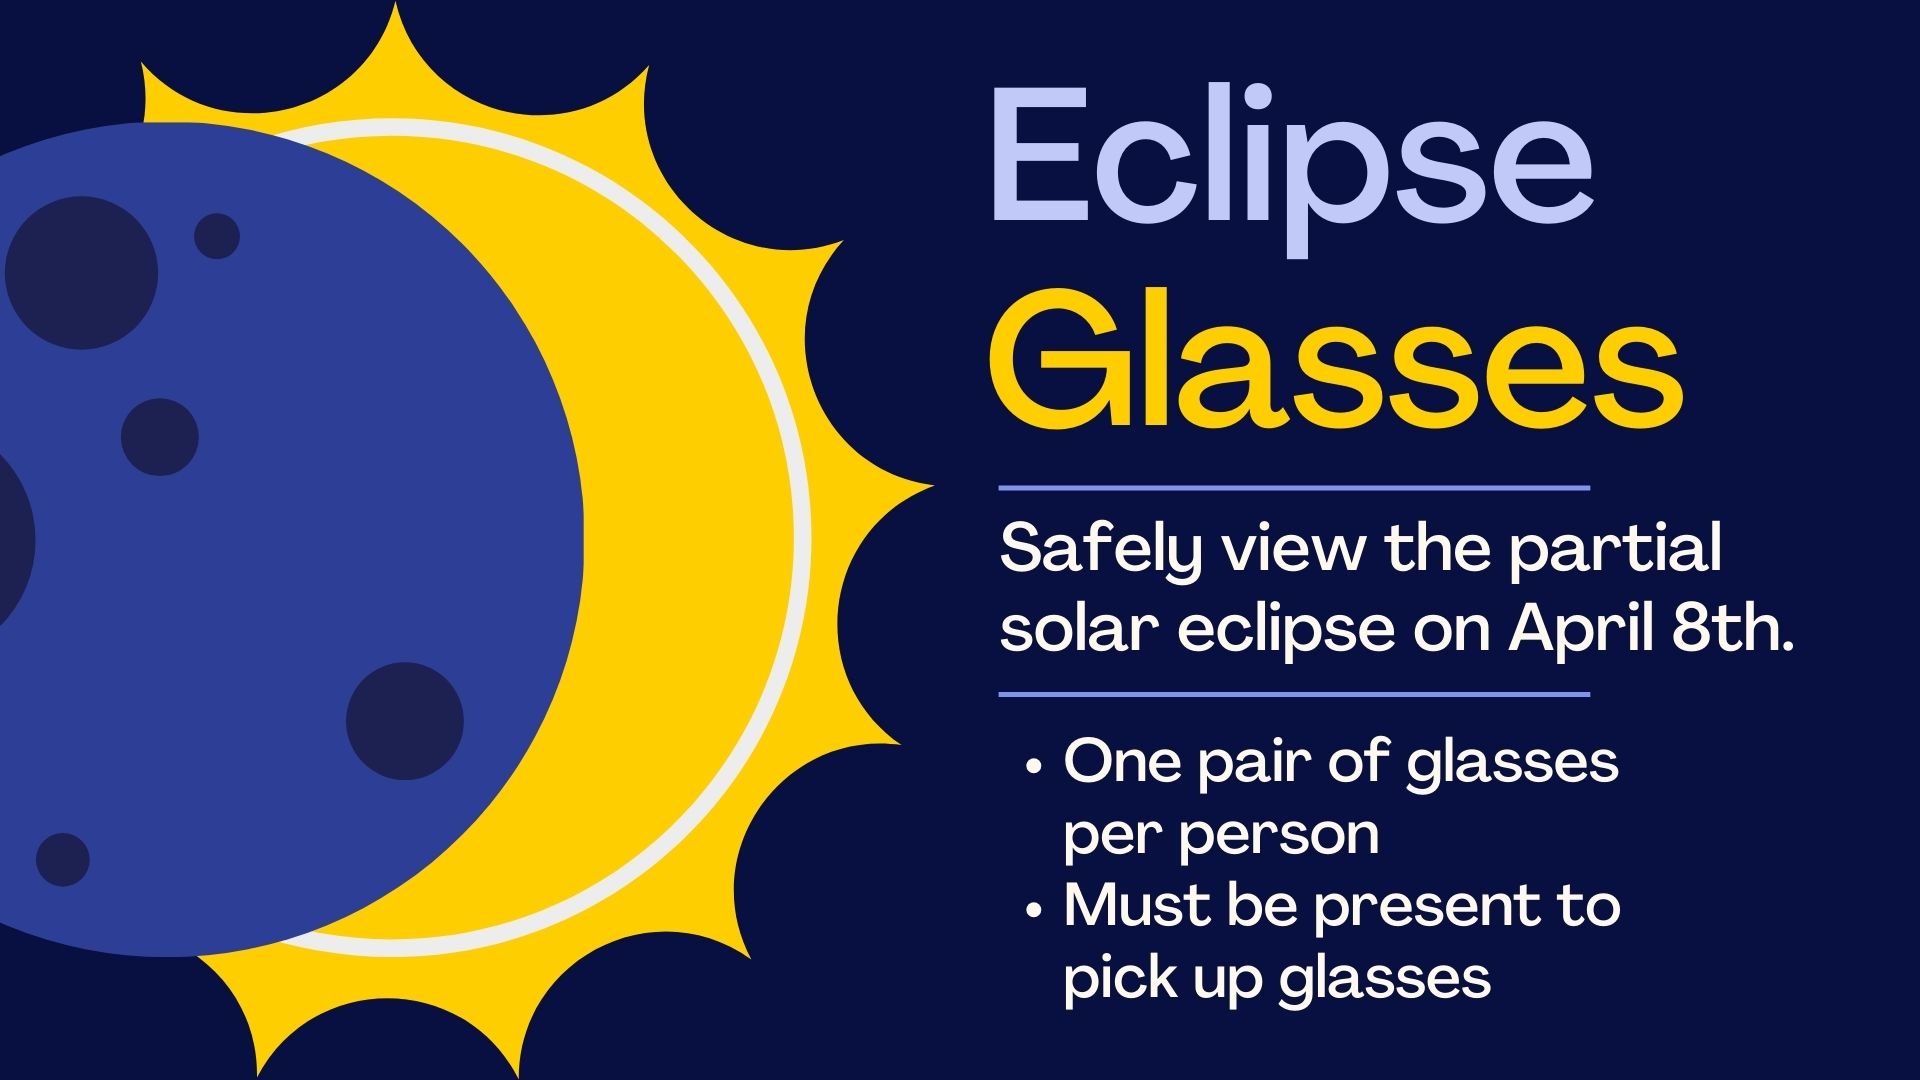 illustration of moon in front of sun with text that reads "Eclipse Glasses. One pair of glasses per person Must be present to pick up glasses"